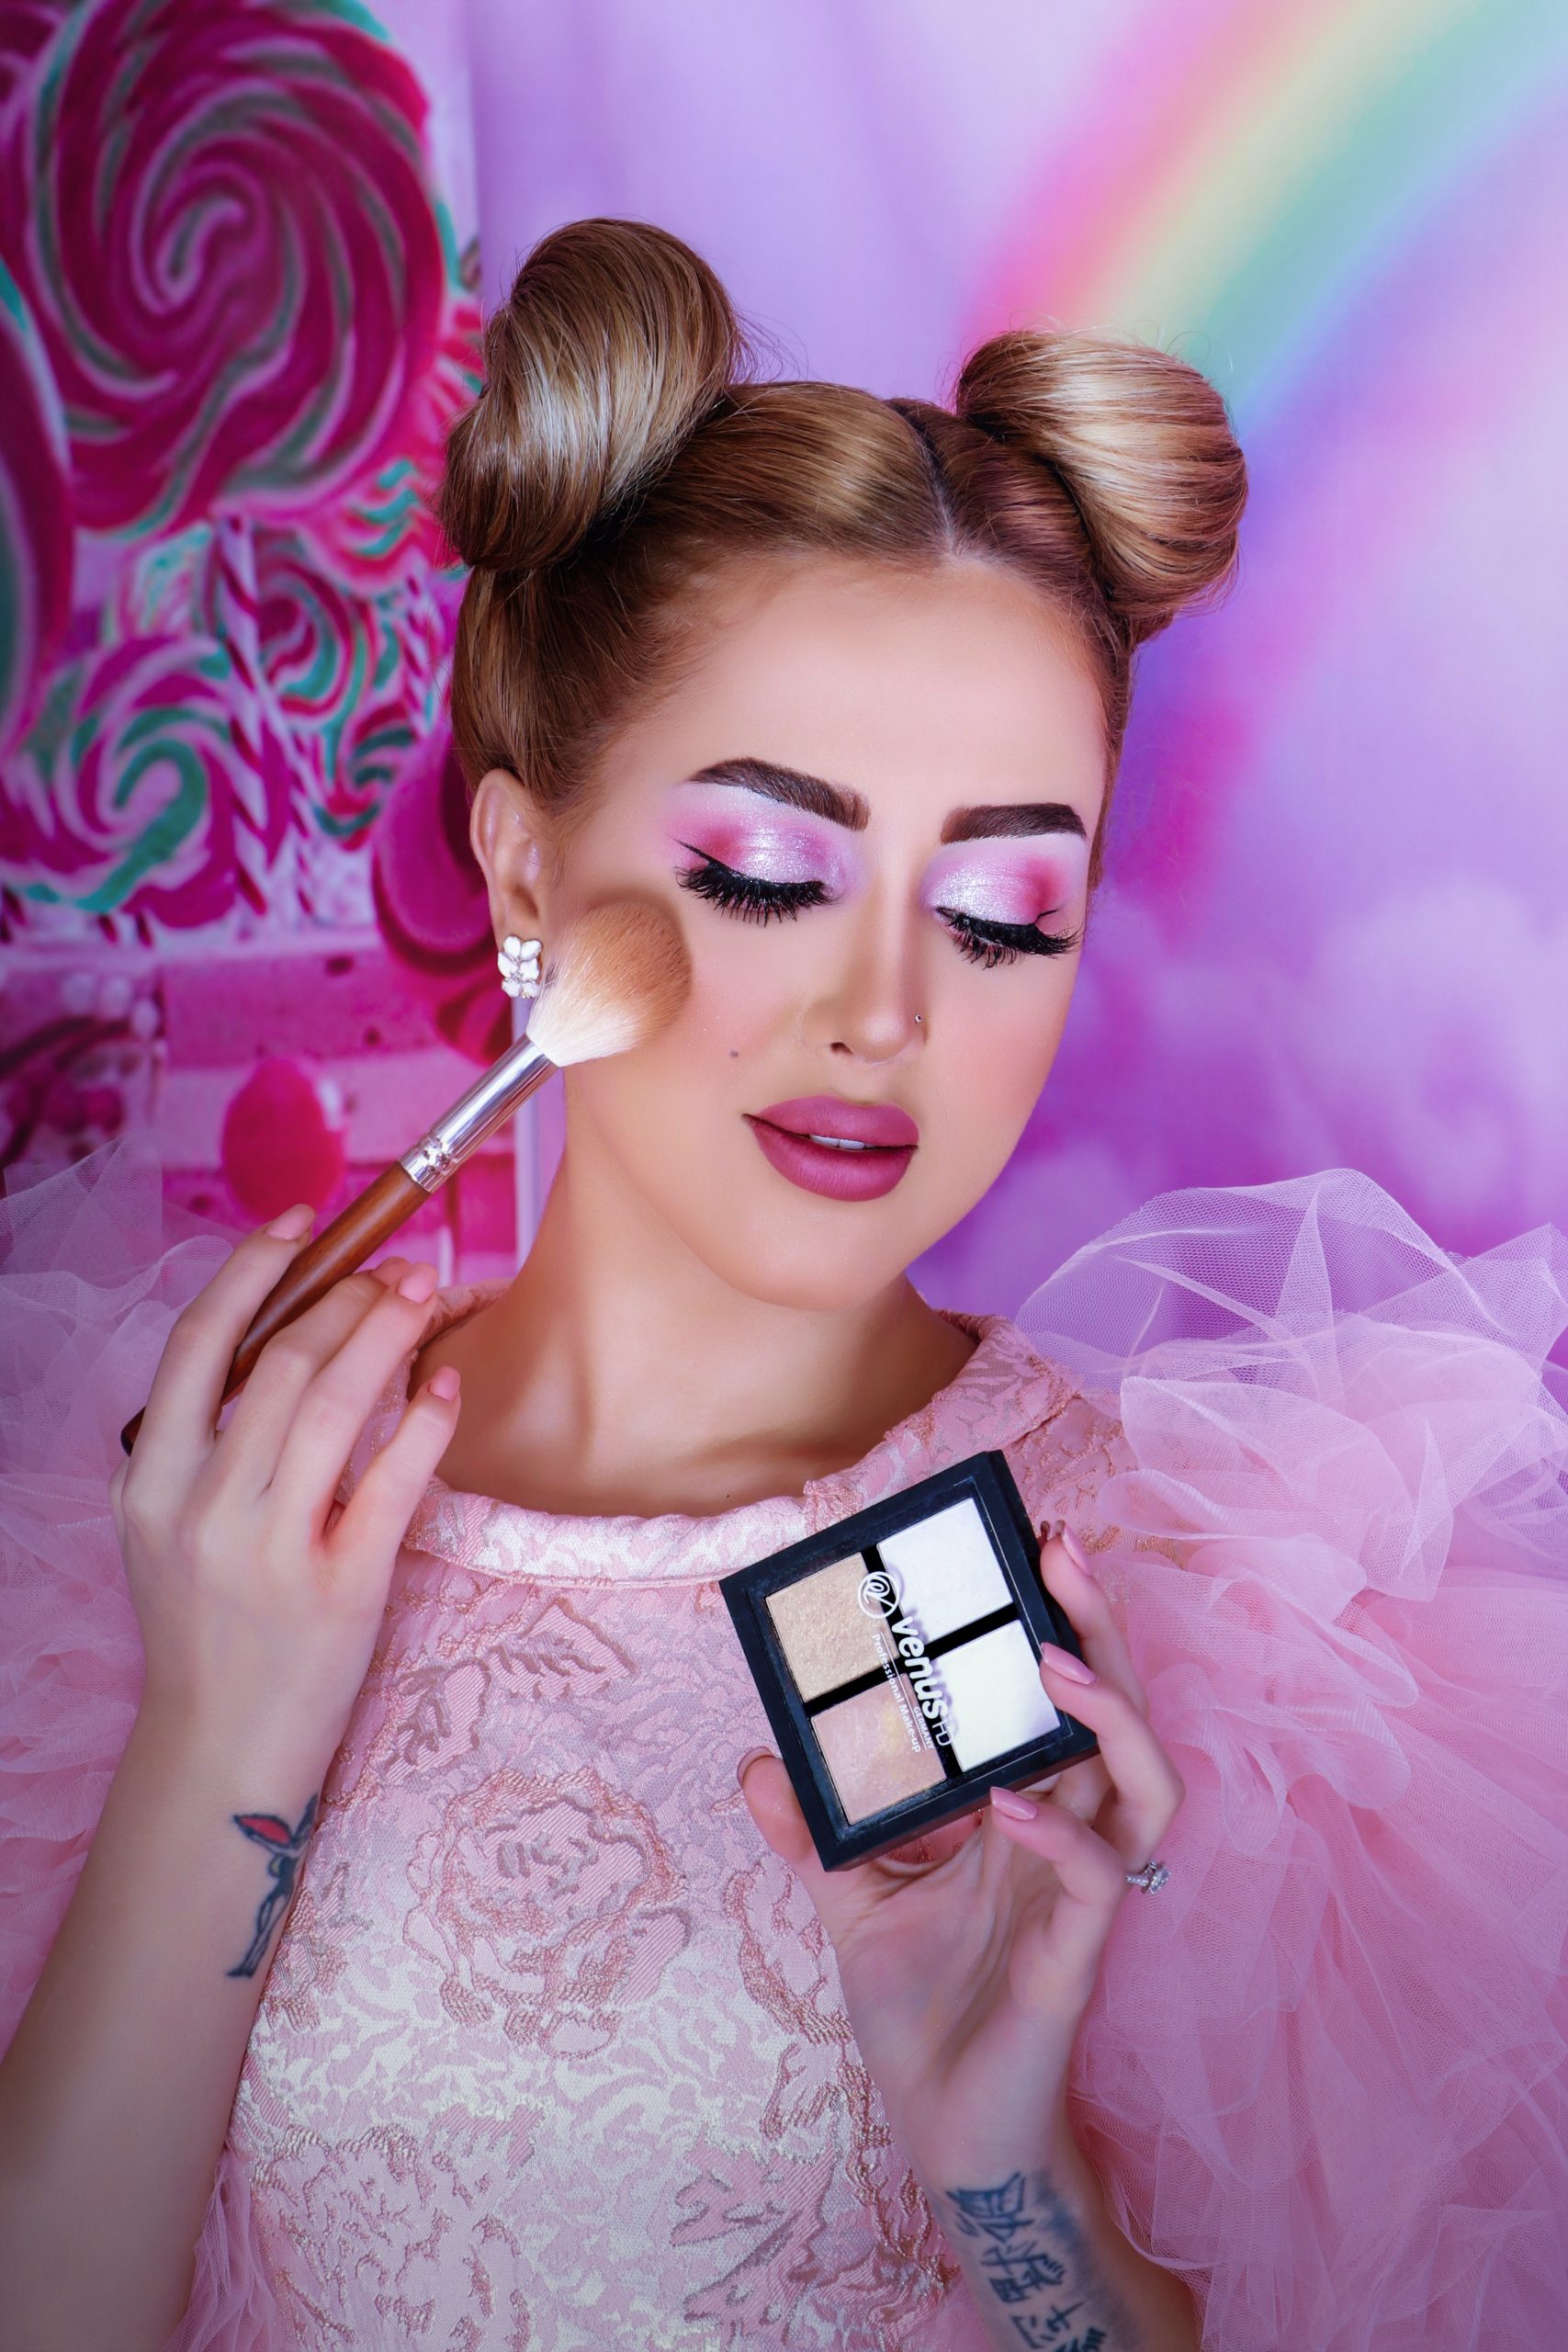 Finding the Right Beauty School for Your Training